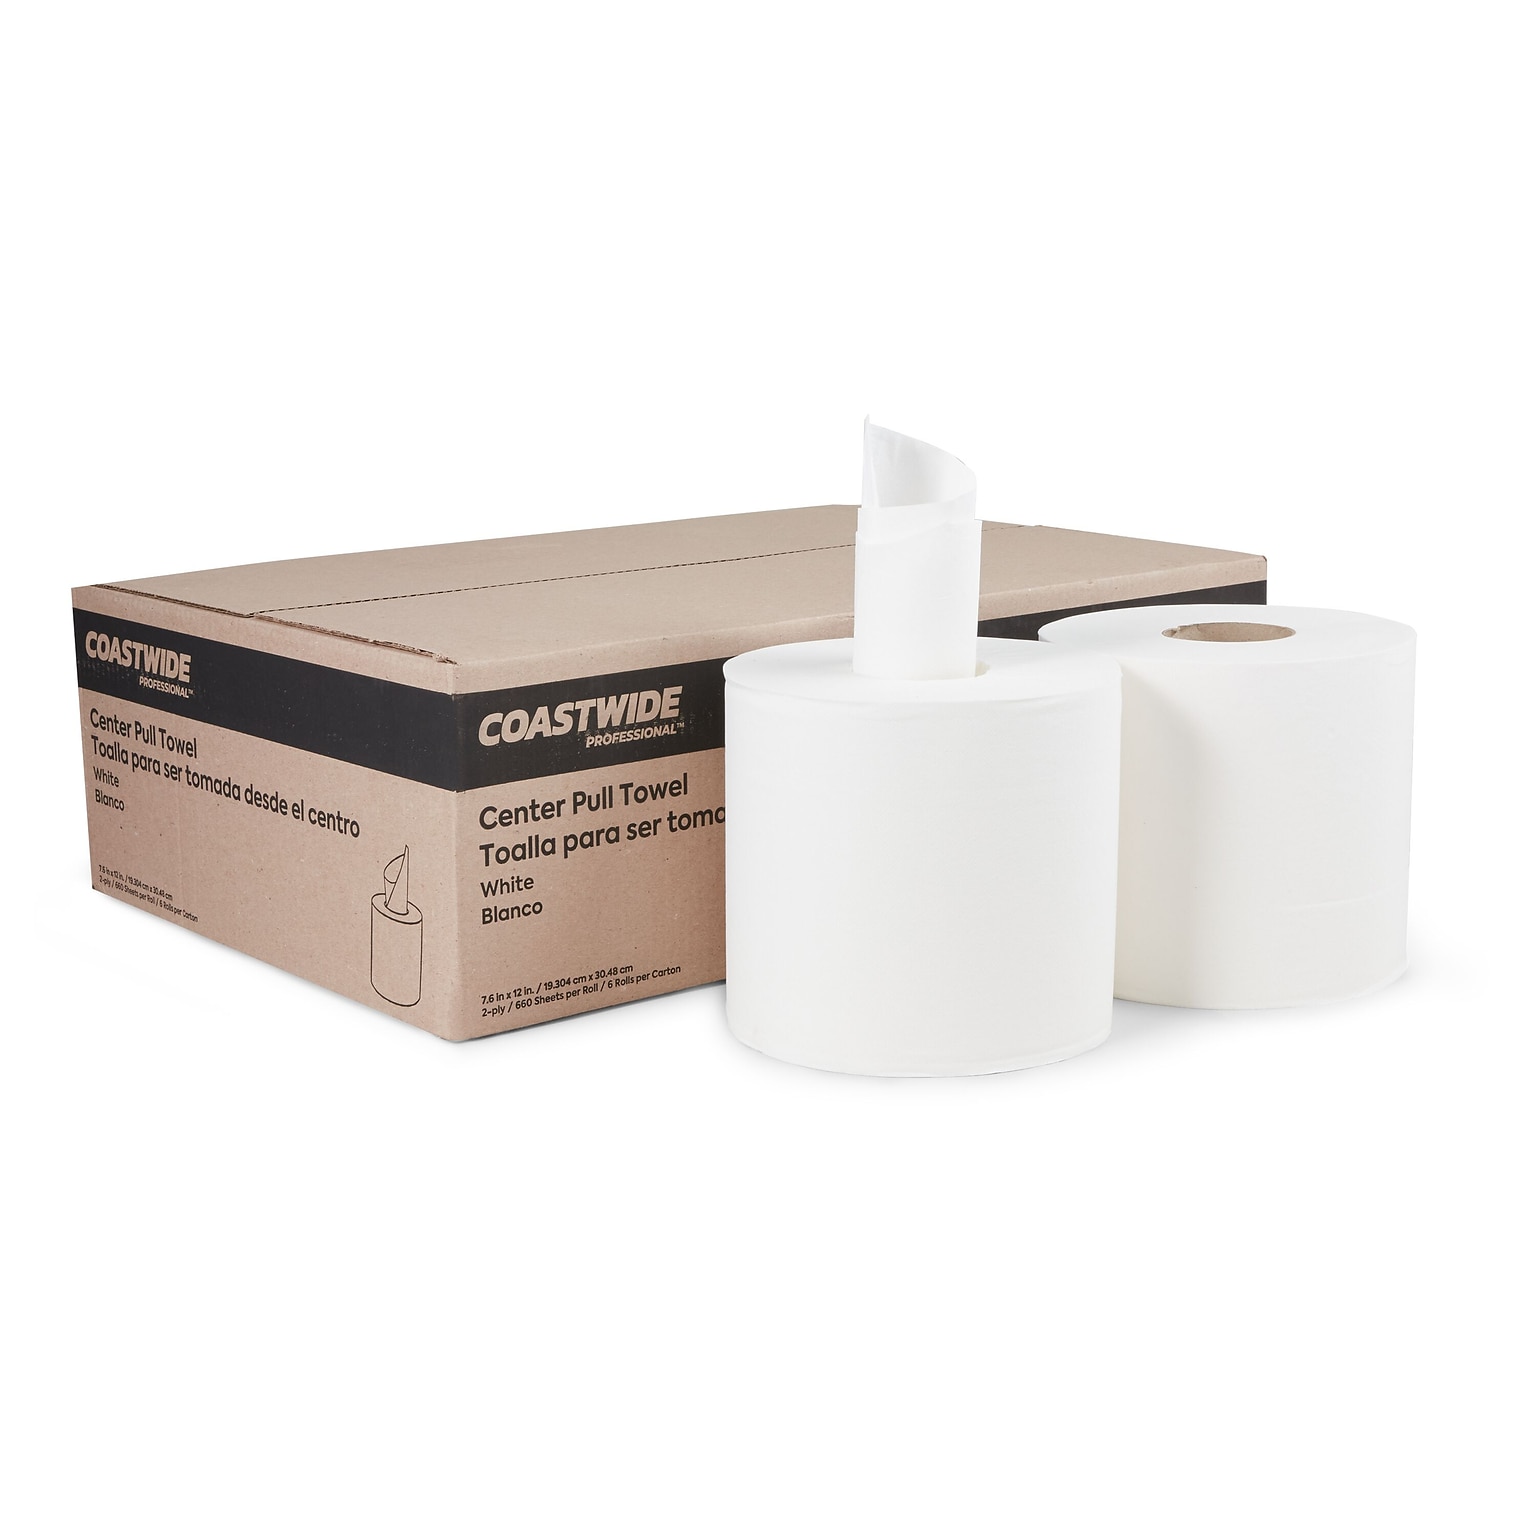 Coastwide Professional™ Centerpull Paper Towel, 2-Ply, White, 660 Sheets/Roll, 6 Rolls/Carton (CW26115)